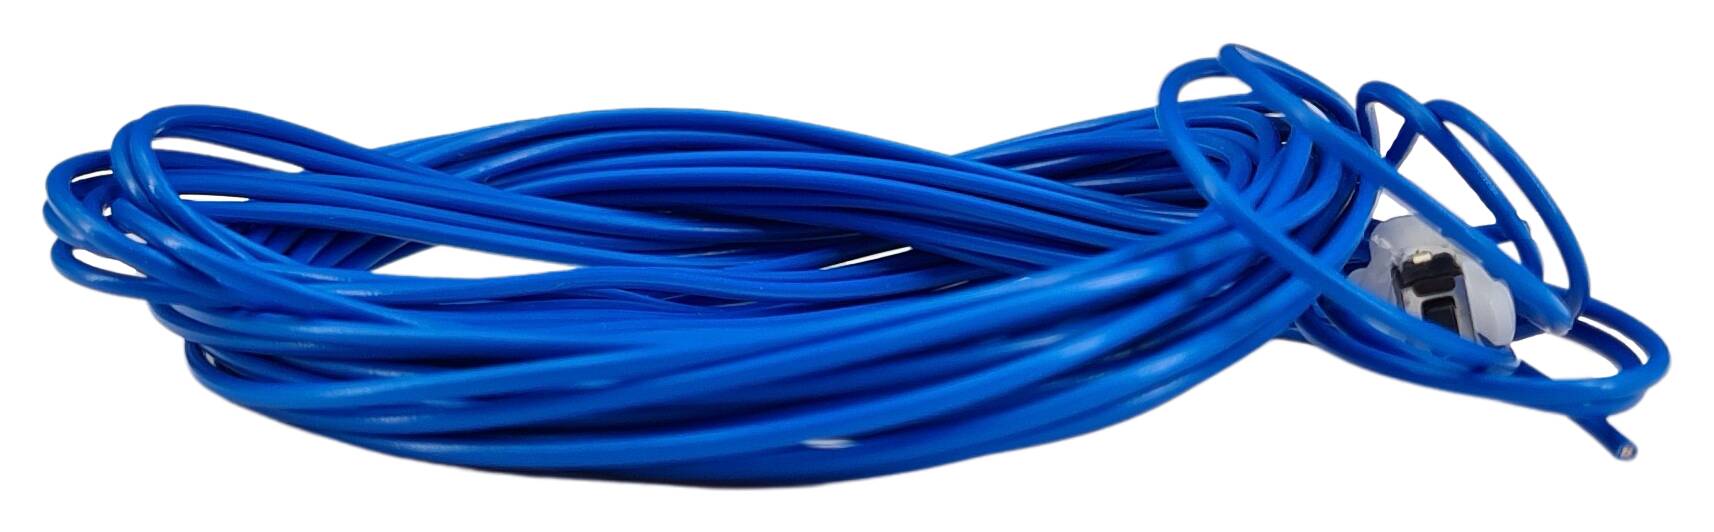 push button for Pouls-dimmer with cable 2.700 mm long blue